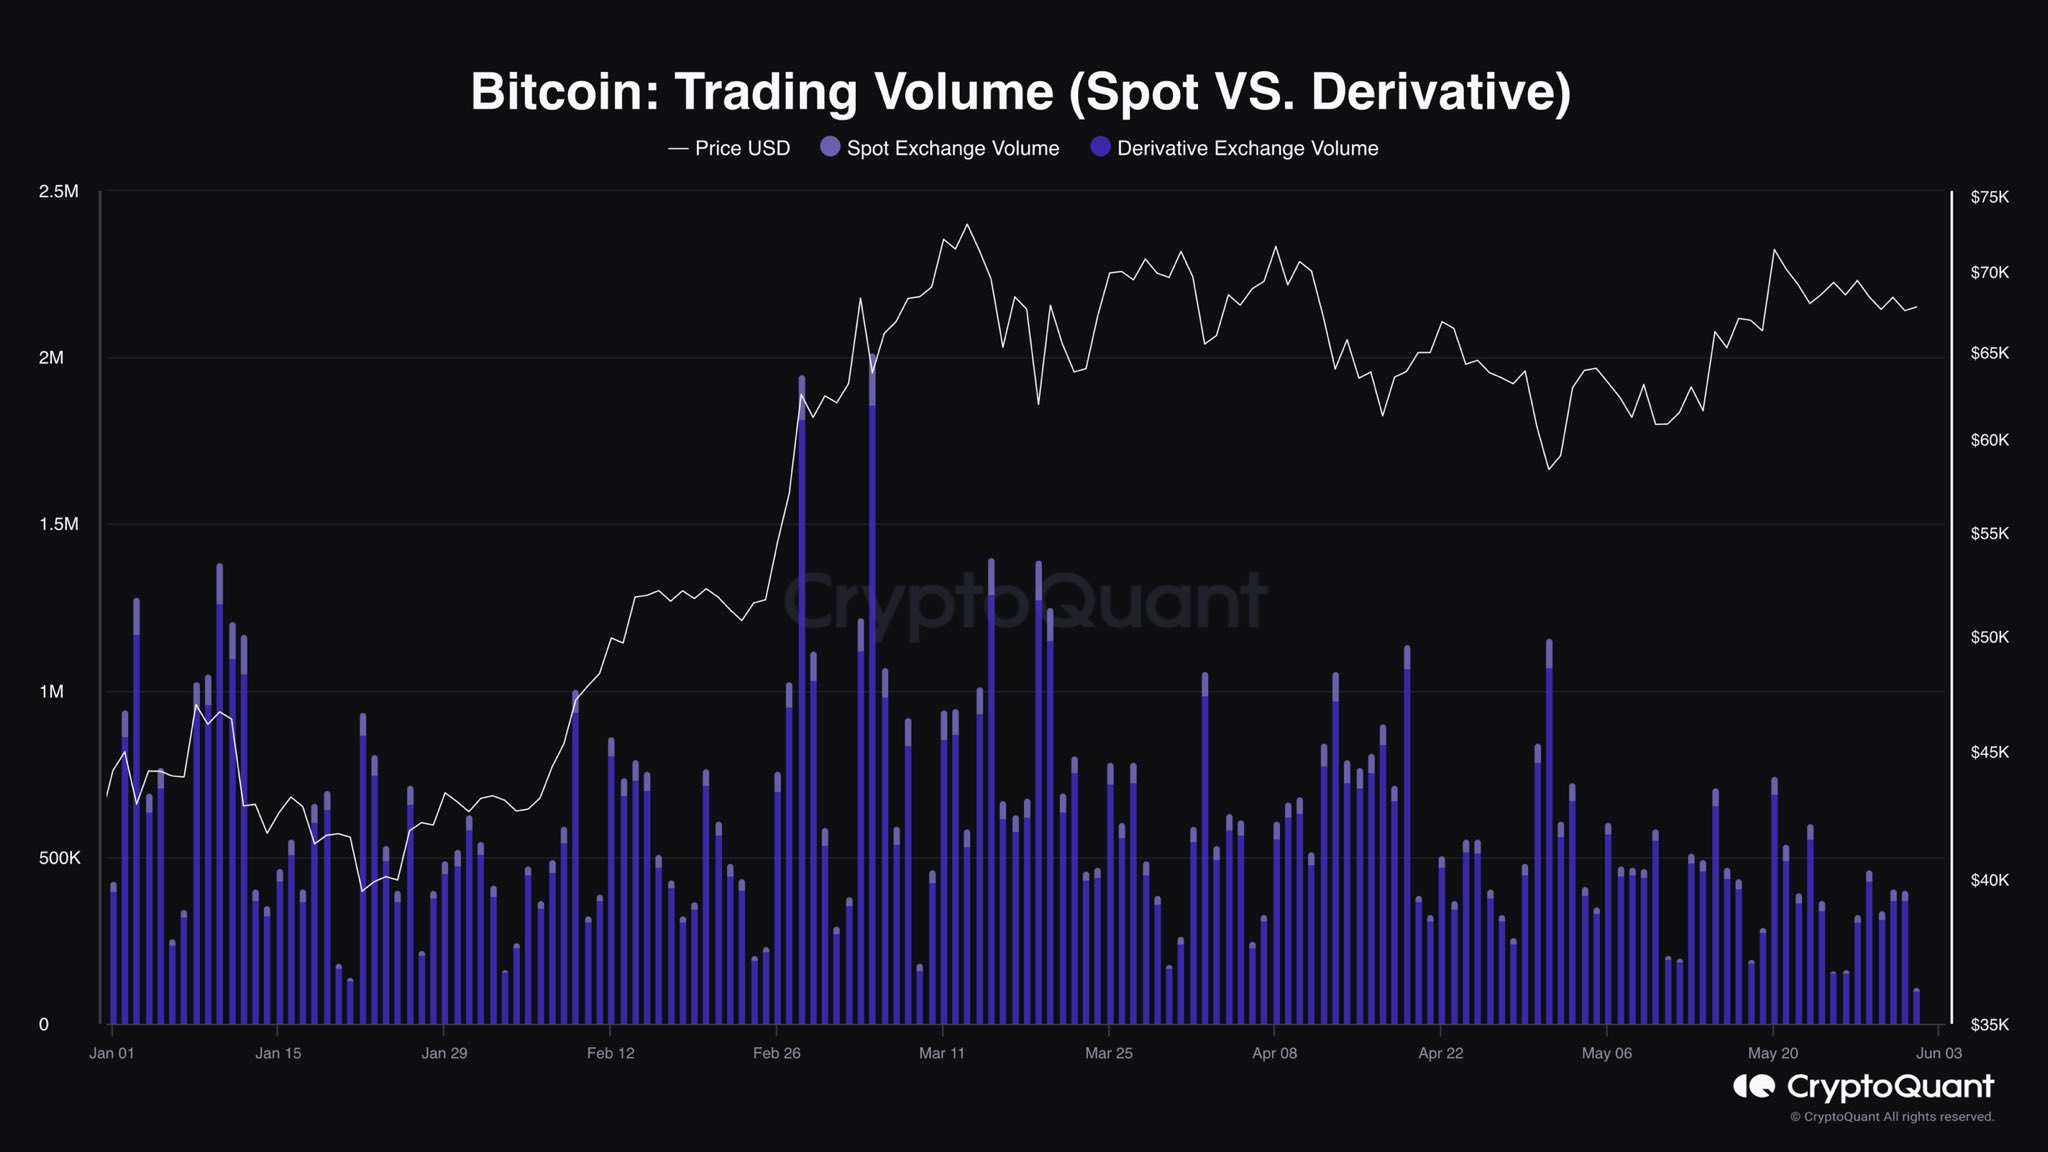 Bitcoin trading volume on exchanges